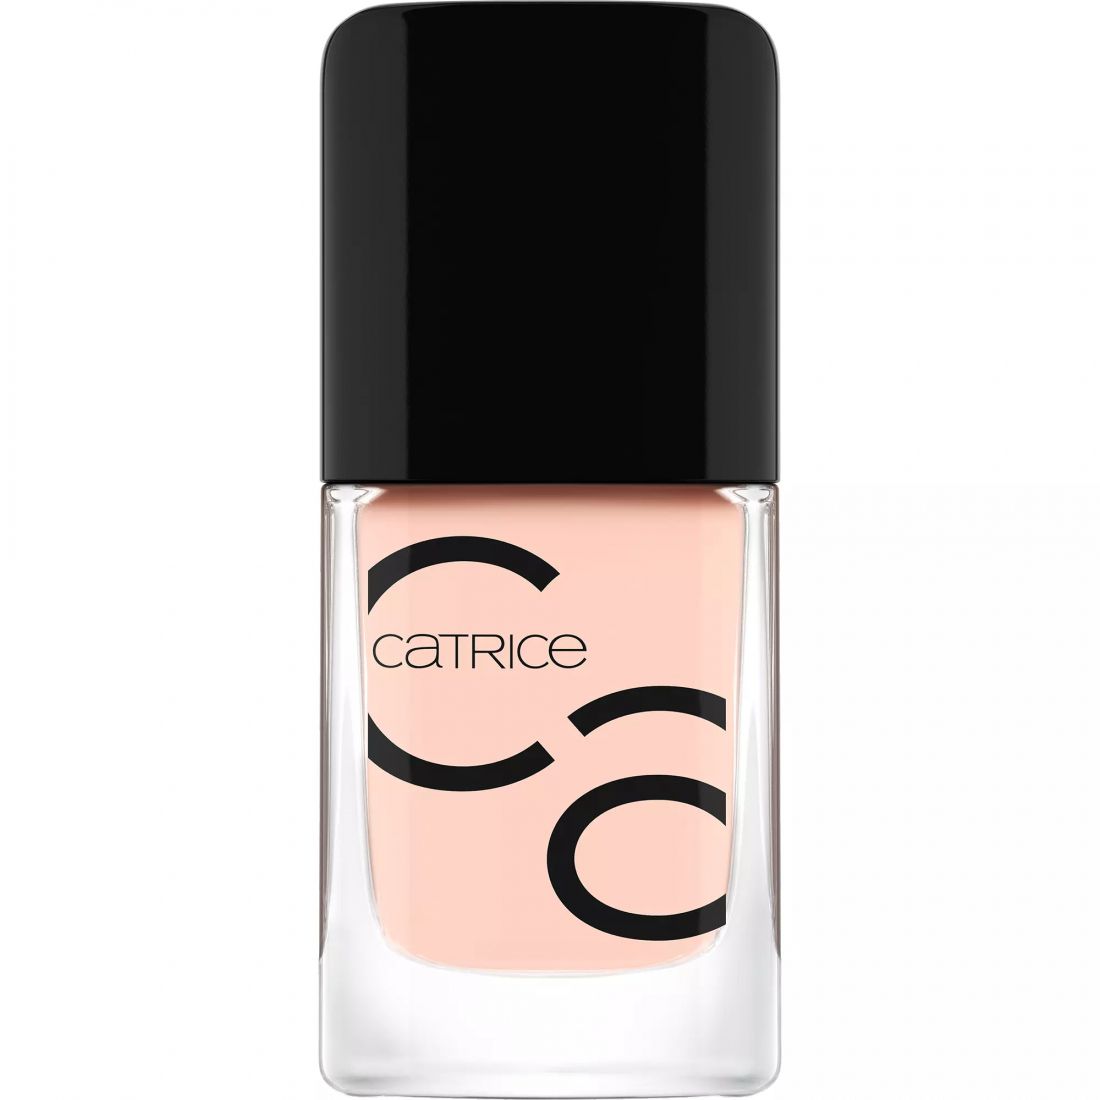 Catrice - Vernis à ongles en gel 'Iconails' - 133 Never Peachless 10.5 ml